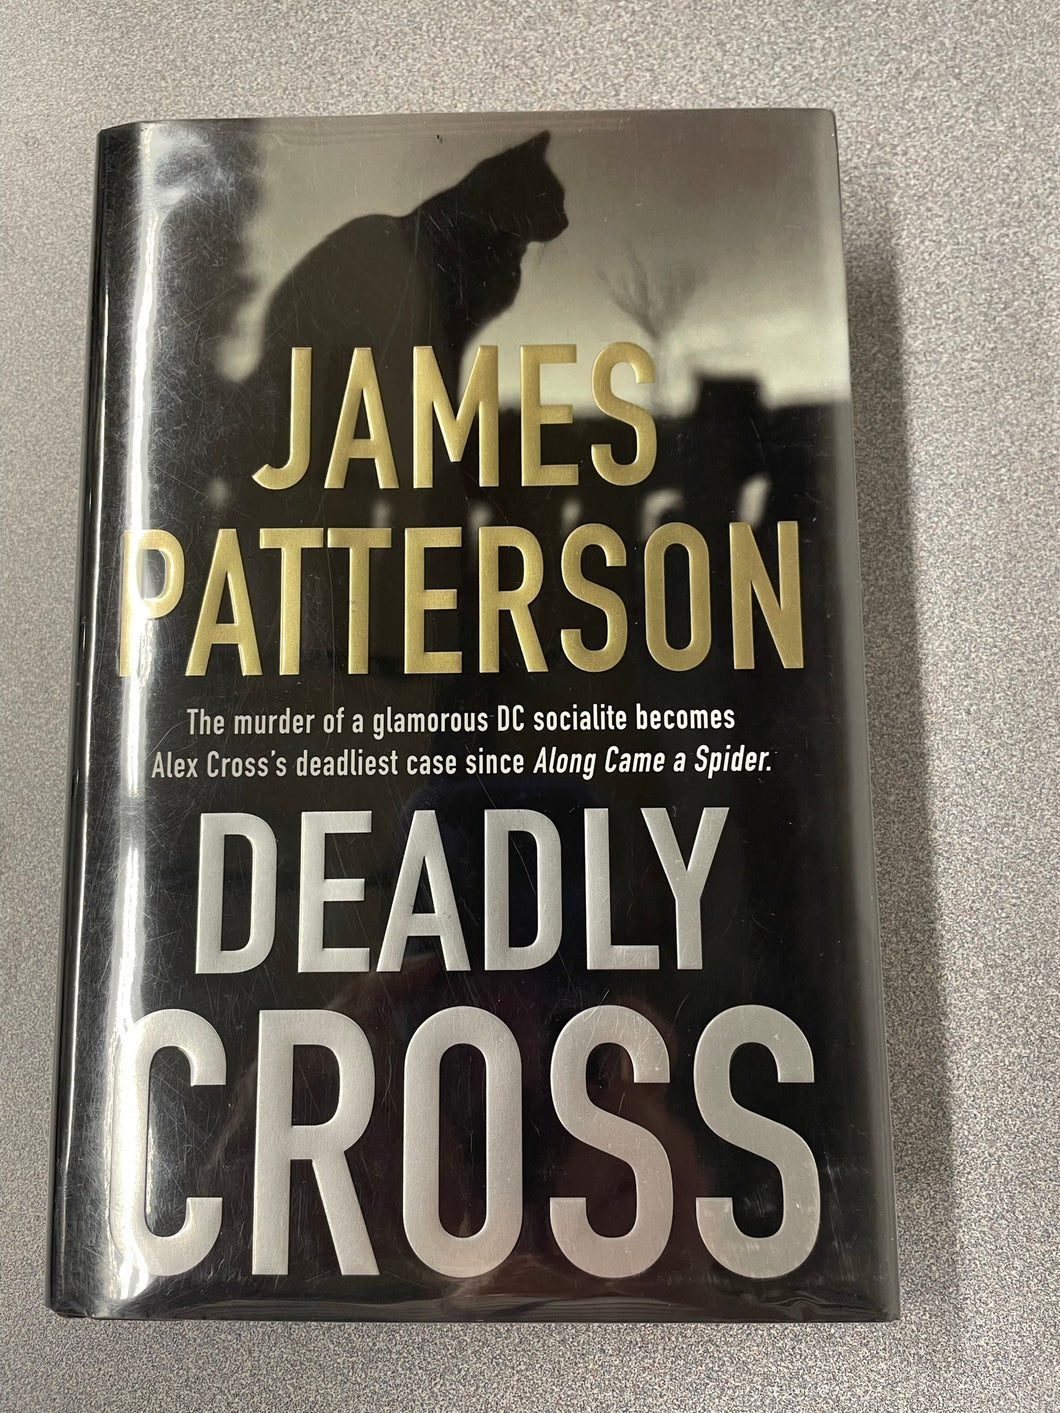 Patterson, James, Deadly Cross [2020] MY 6/23